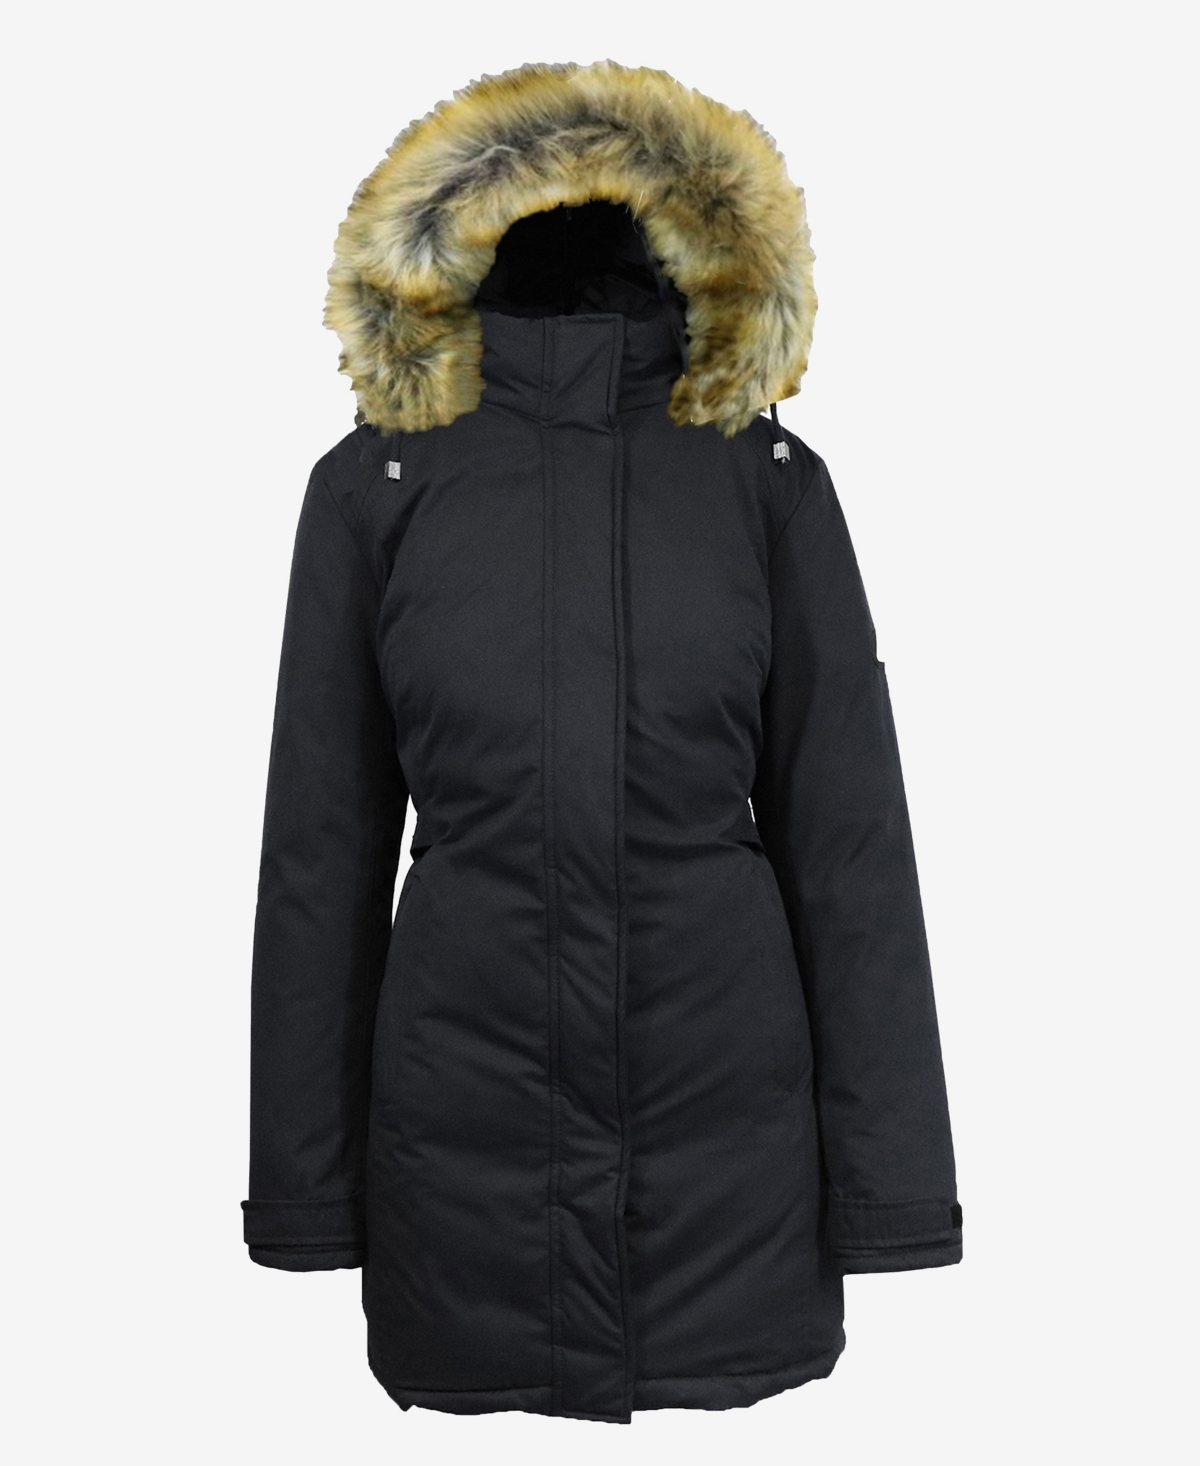 Galaxy By Harvic Women's Heavyweight Parka Jacket With Detachable Hood In Black